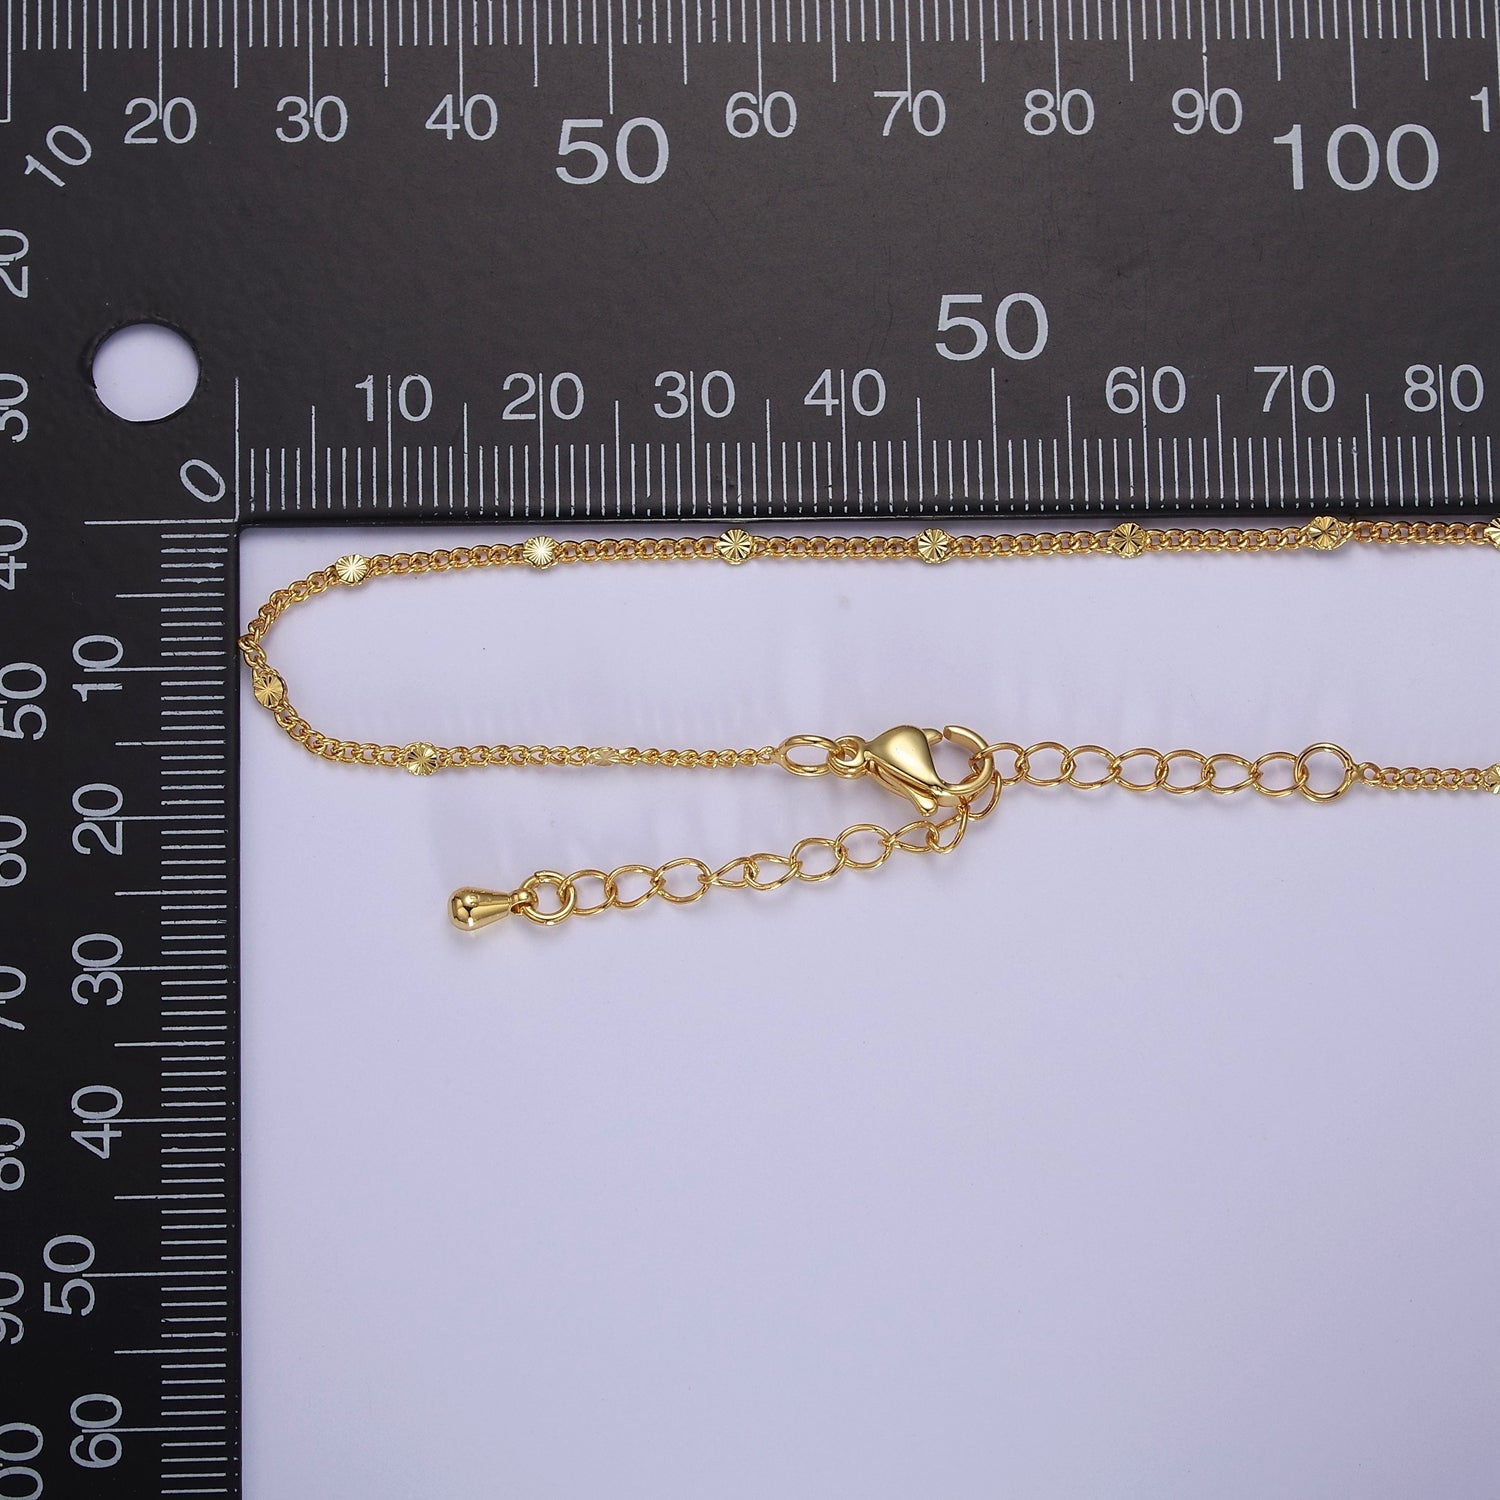 Dainty Sunburst Curb Chain Necklace ∙ 14K Gold Filled Necklace Curb Link Chain 18 inch + 2.5 inch extender Ready to Wear WA-937 - DLUXCA